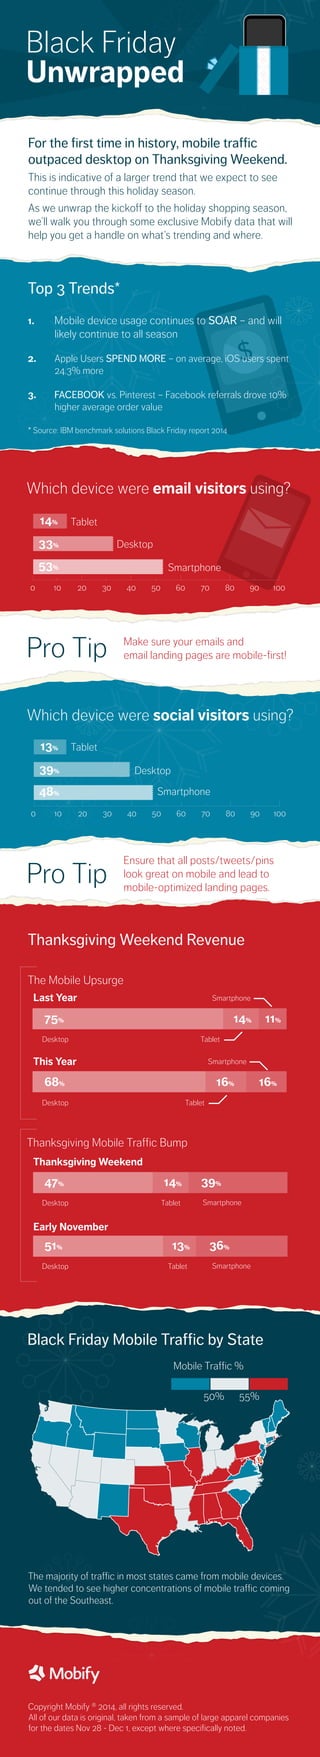 Black Friday 
Unwrapped 
For the first time in history, mobile traffic 
outpaced desktop on Thanksgiving Weekend. 
This is indicative of a larger trend that we expect to see 
continue through this holiday season. 
As we unwrap the kickoff to the holiday shopping season, 
we’ll walk you through some exclusive Mobify data that will 
help you get a handle on what’s trending and where. 
1. Mobile device usage continues to SOAR – and will 
$ 
Top 3 Trends* 
likely continue to all season 
2. Apple Users SPEND MORE – on average, iOS users spent 
24.3% more 
3. FACEBOOK vs. Pinterest – Facebook referrals drove 10% 
higher average order value 
* Source: IBM benchmark solutions Black Friday report 2014 
Which device were email visitors using? 
Desktop 
Smartphone 
Tablet 
14% 
33% 
53% 
0 10 20 30 40 50 60 70 80 90 100 
Pro Tip 
Which device were social visitors using? 
Desktop 
Smartphone 
Tablet 
13% 
39% 
48% 
0 10 20 30 40 50 60 70 80 90 100 
Ensure that all posts/tweets/pins 
look great on mobile and lead to 
mobile-optimized landing pages. Pro Tip 
Thanksgiving Weekend Revenue 
The Mobile Upsurge 
Last Year 
75% 14% 11% 
Desktop 
This Year 
Smartphone 
68% 16% 16% 
Desktop 
Tablet 
Thanksgiving Mobile Traffic Bump 
Thanksgiving Weekend 
47% 14% 39% 
Desktop Tablet Smartphone 
Early November 
Make sure your emails and 
email landing pages are mobile-first! 
Smartphone 
Tablet 
51% 13% 36% 
Desktop Tablet Smartphone 
Black Friday Mobile Traffic by State 
Mobile Traffic % 
50% 55% 
The majority of traffic in most states came from mobile devices. 
We tended to see higher concentrations of mobile traffic coming 
out of the Southeast. 
Copyright Mobify ® 2014, all rights reserved. 
All of our data is original, taken from a sample of large apparel companies 
for the dates Nov 28 - Dec 1, except where specifically noted. 
